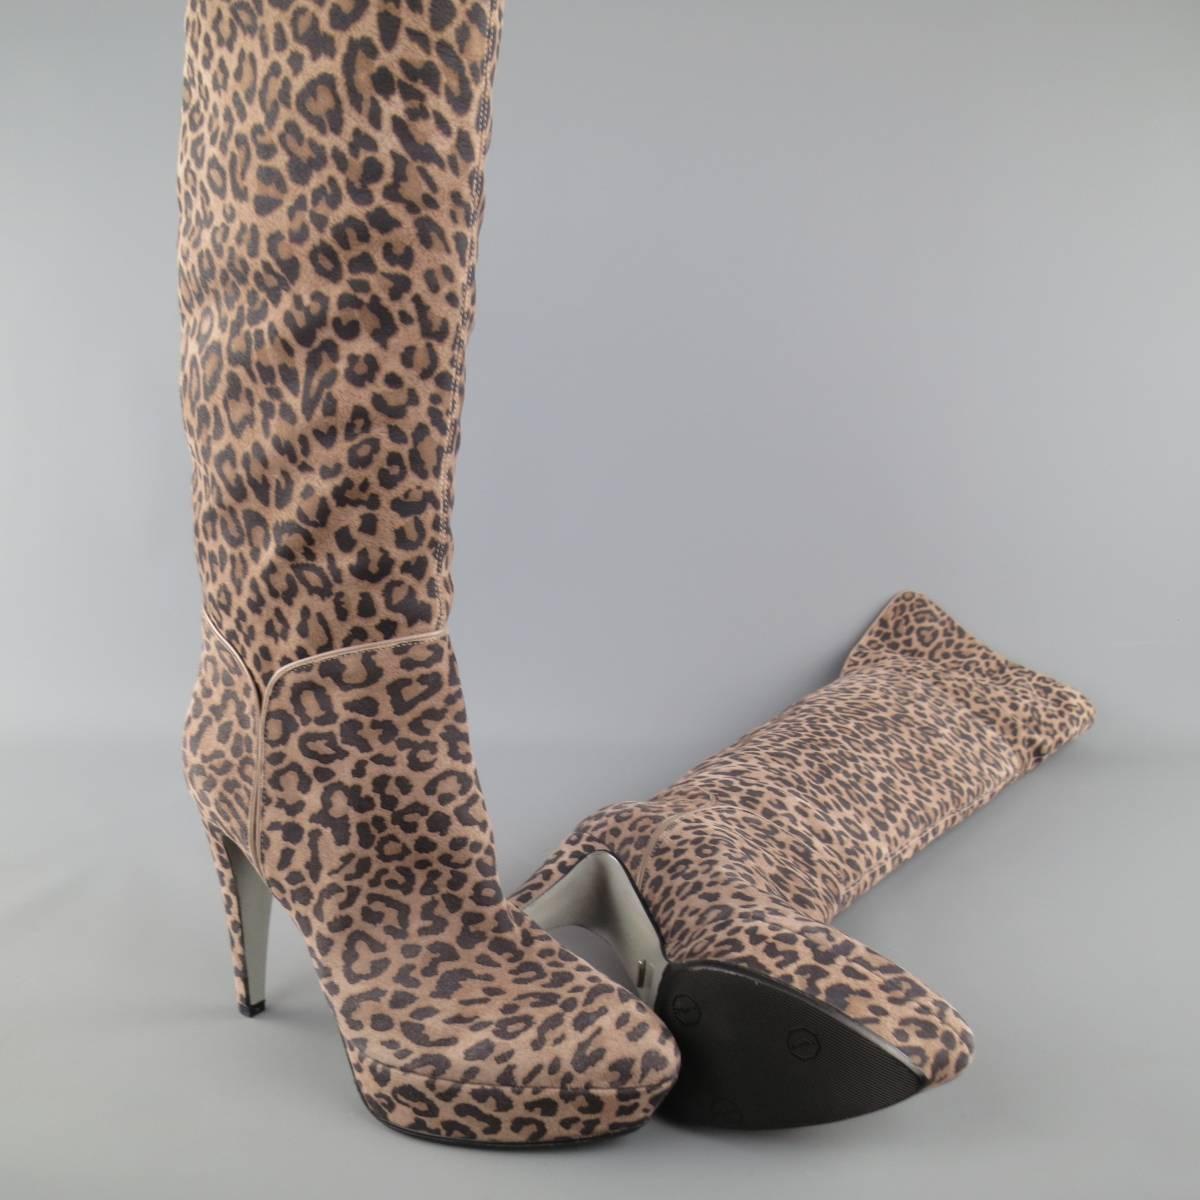 Women's SERGIO ROSSI Size 6 Taupe Leopard Print Suede Over The Knee Platform Boots